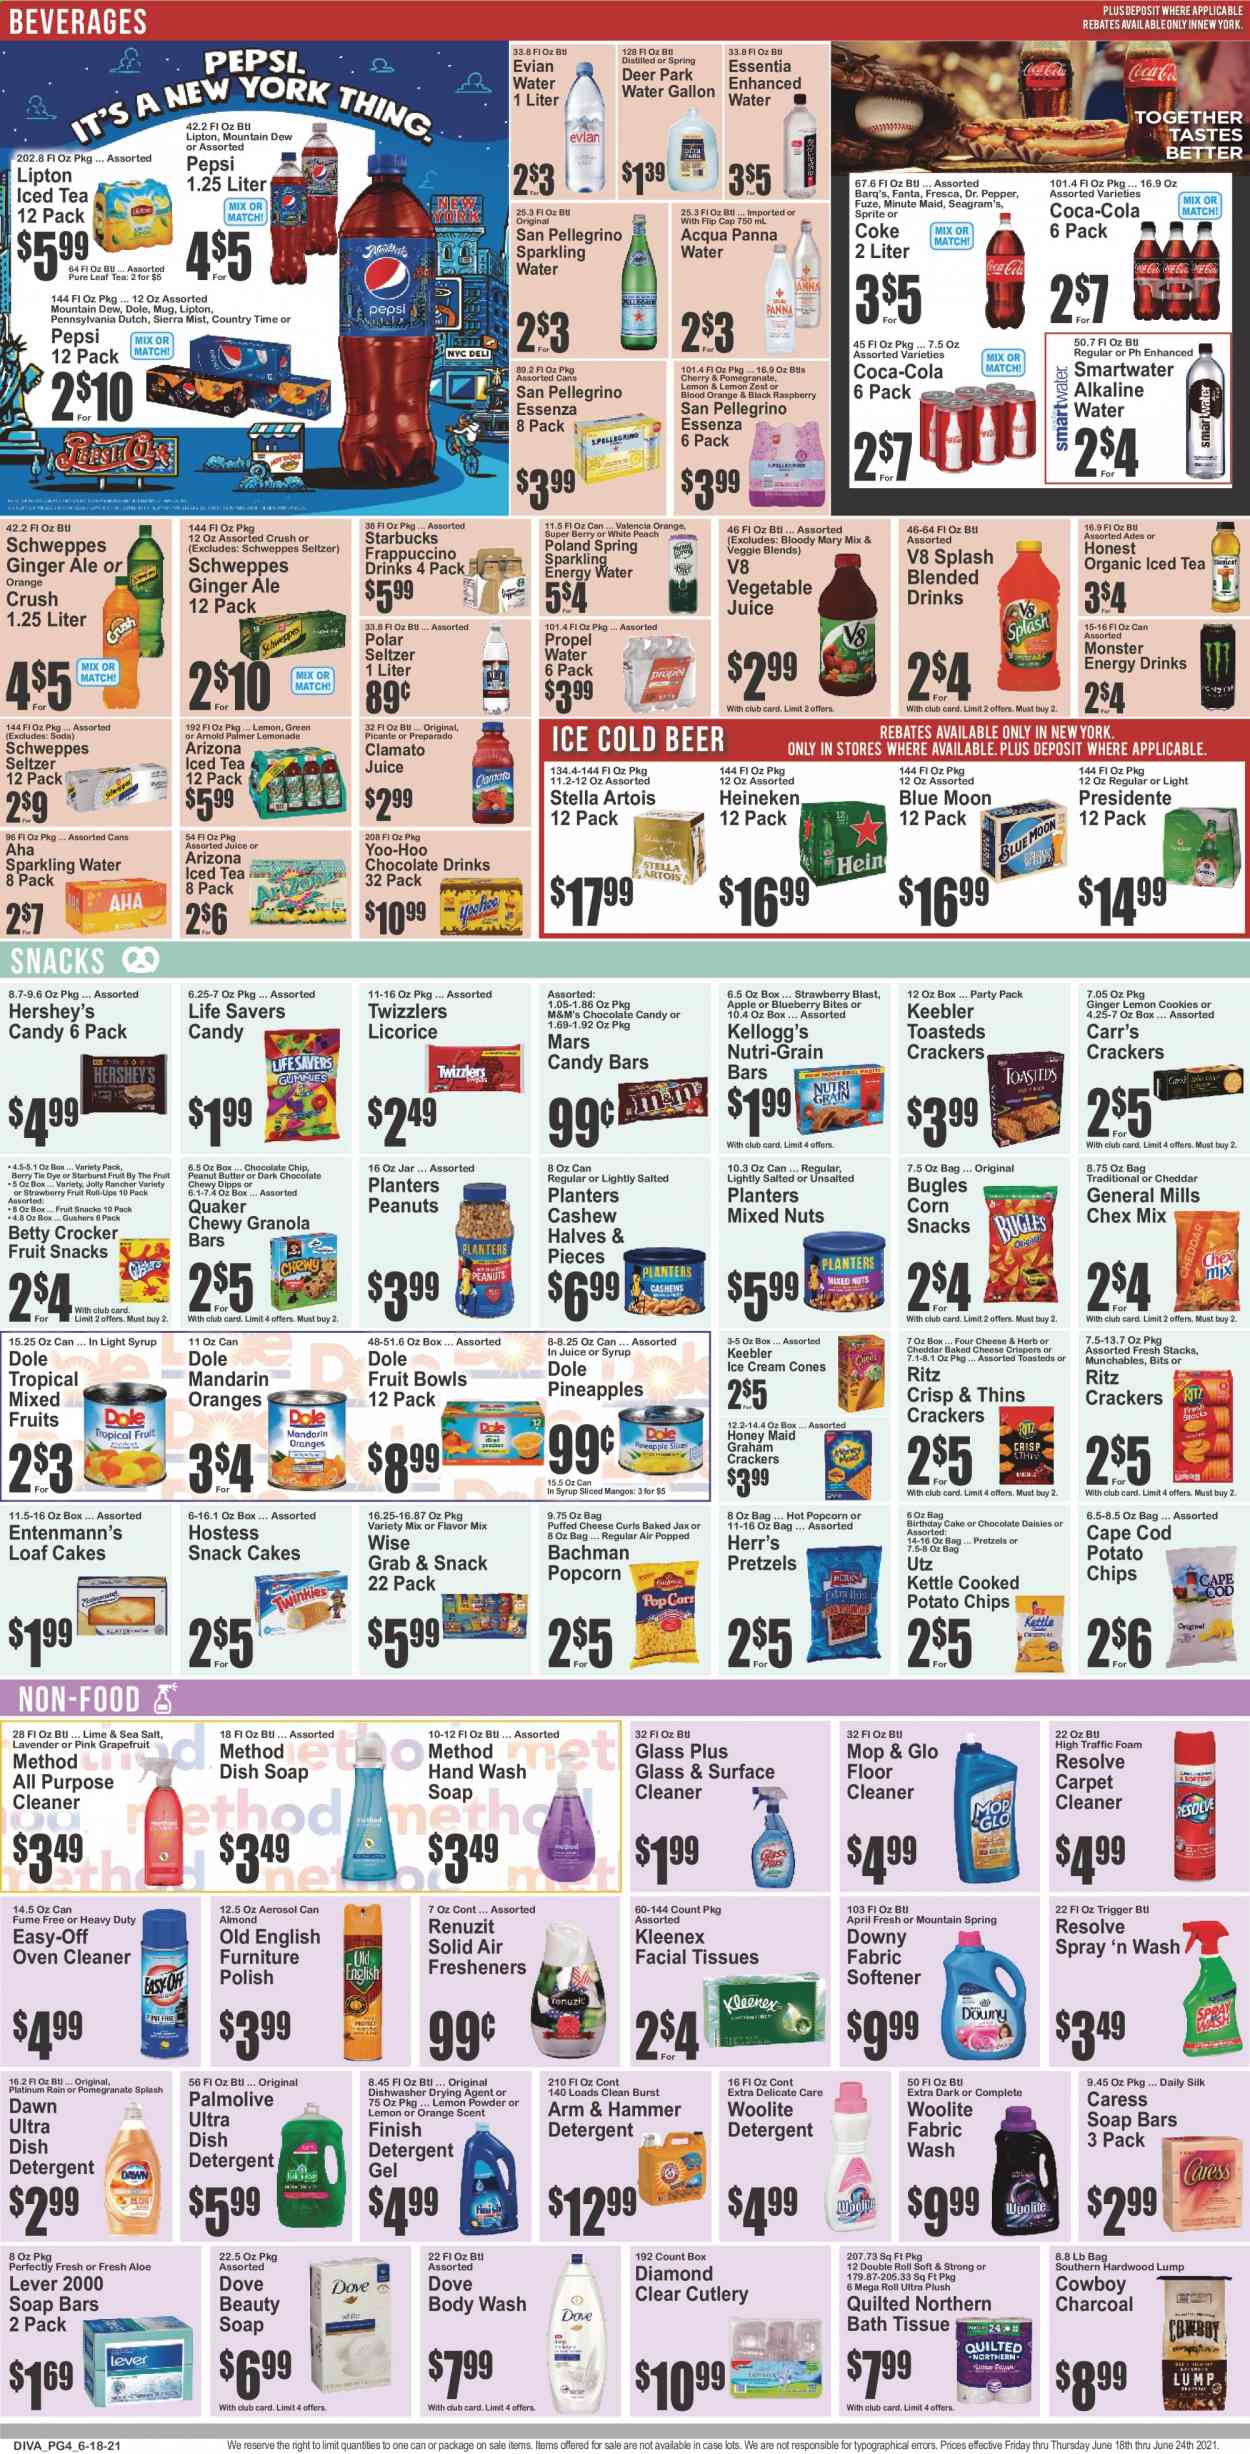 thumbnail - Key Food Flyer - 06/18/2021 - 06/24/2021 - Sales products - pretzels, cake, Entenmann's, corn, Dole, grapefruits, mandarines, mango, pineapple, cod, Quaker, Silk, ice cream, Hershey's, cookies, graham crackers, Mars, M&M's, crackers, Kellogg's, fruit snack, chocolate candies, Nutri-Grain bars, Keebler, Starburst, RITZ, potato chips, chips, Thins, popcorn, Chex Mix, ARM & HAMMER, granola bar, Honey Maid, Nutri-Grain, peanut butter, peanuts, mixed nuts, Planters, Coca-Cola, ginger ale, lemonade, Mountain Dew, Schweppes, Sprite, Pepsi, juice, Fanta, energy drink, Monster, Lipton, ice tea, Dr. Pepper, Clamato, Monster Energy, AriZona, Sierra Mist, vegetable juice, Country Time, fruit punch, seltzer water, soda, sparkling water, Smartwater, alkaline water, Evian, San Pellegrino, chocolate drink, Pure Leaf, Starbucks, frappuccino, beer, Stella Artois, Blue Moon, Heineken, Dove, bath tissue, Kleenex, Quilted Northern, detergent, surface cleaner, cleaner, all purpose cleaner, floor cleaner, Woolite, Glass & Surface cleaner, fabric softener, washing gel, Downy Laundry, body wash, hand wash, Palmolive, soap, facial tissues, polish, mug, Renuzit, air freshener. Page 4.